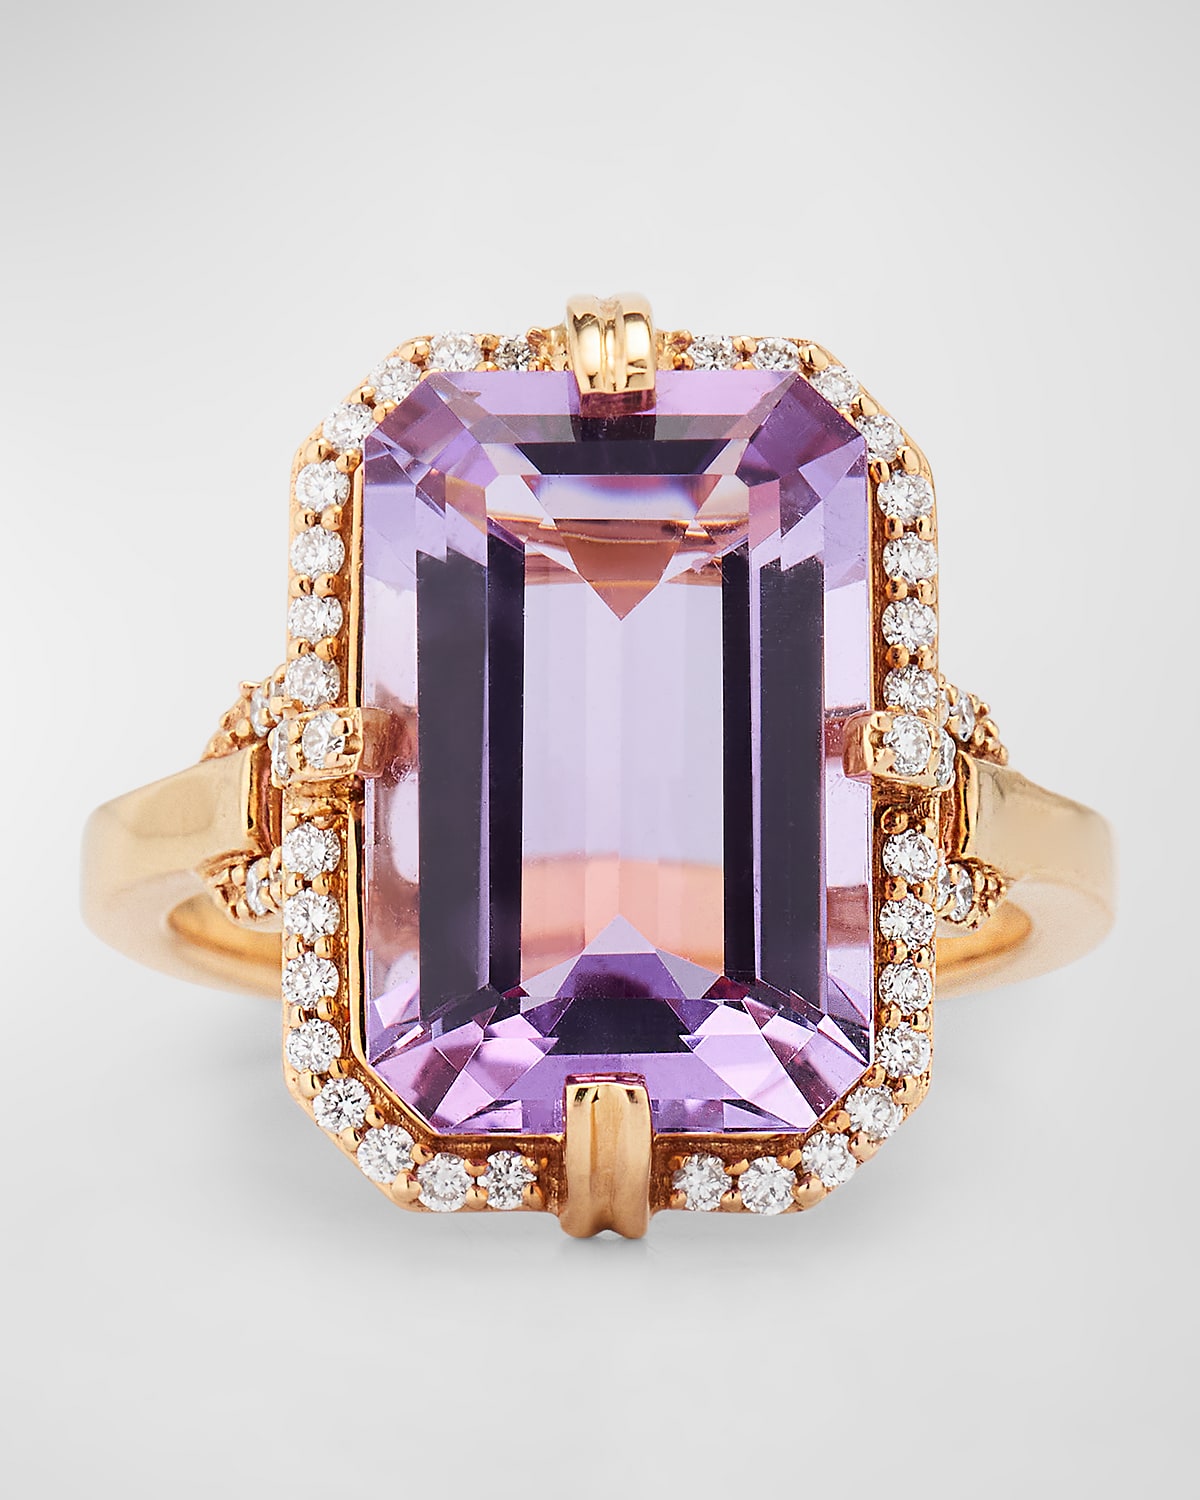 Gossip 10x15mm Emerald Cut Lavender Amethyst Ring with Diamonds in 18K Pink Gold